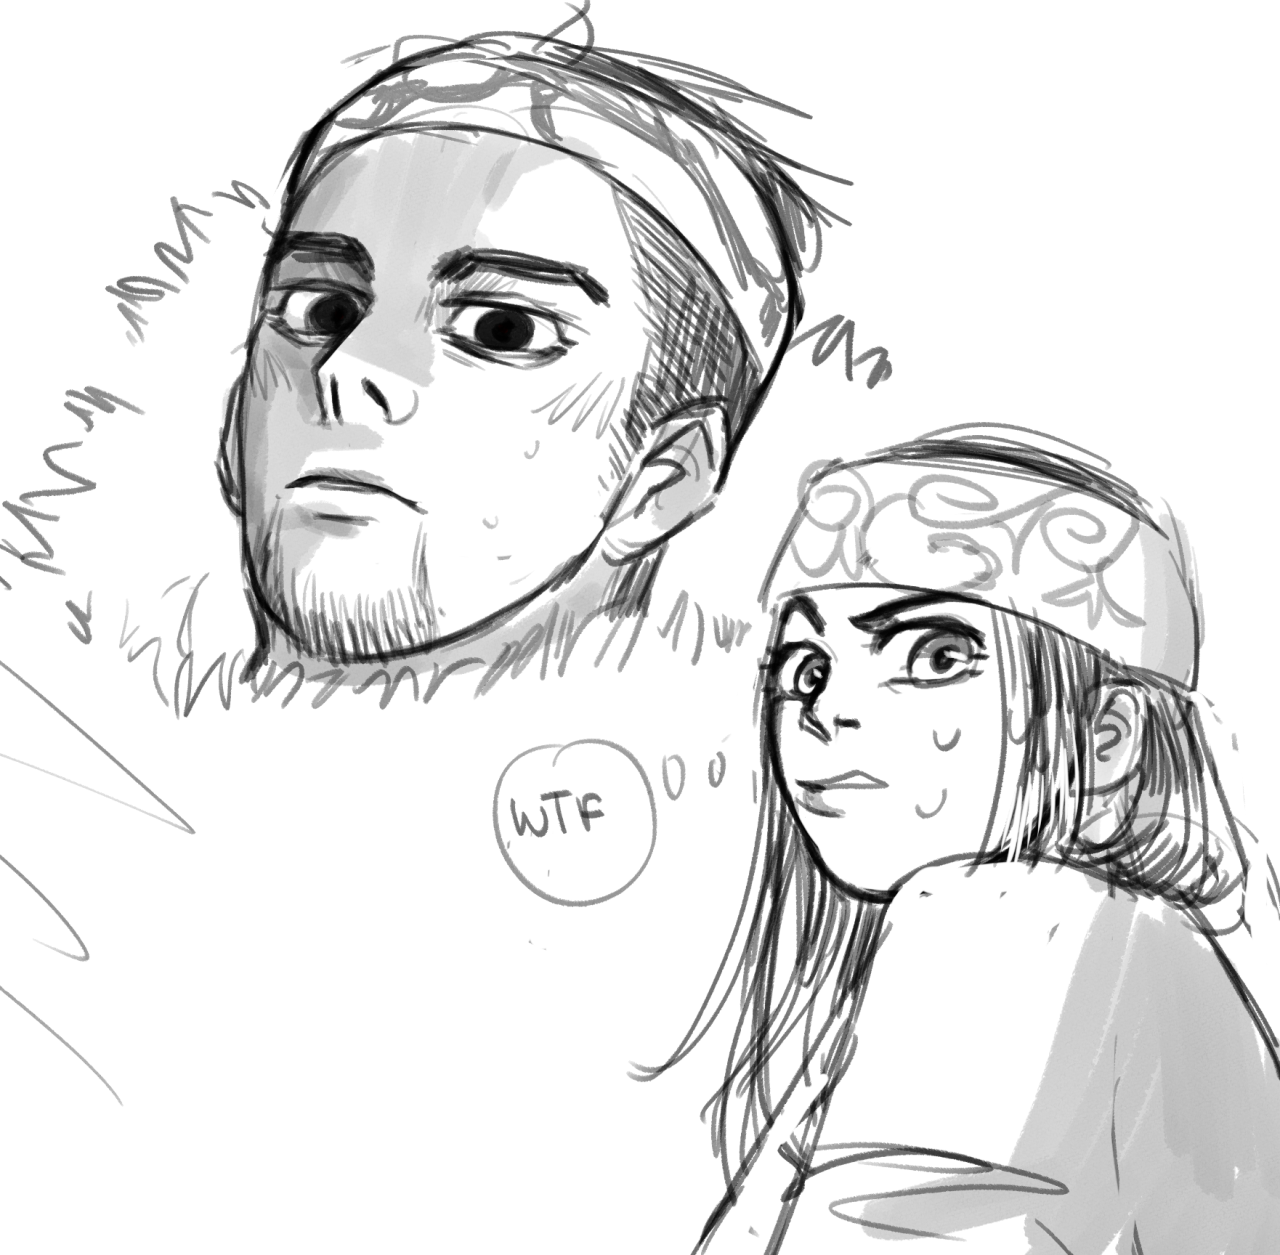 how did she not pick up on his awful vibes #ik its cus he does pass the vibe check deep down inside his heart #but still#gk#golden kamuy#asirpa#ogata hyakunosuke#my art #asirpa: whats up lil buddy? got a staring problem pal?